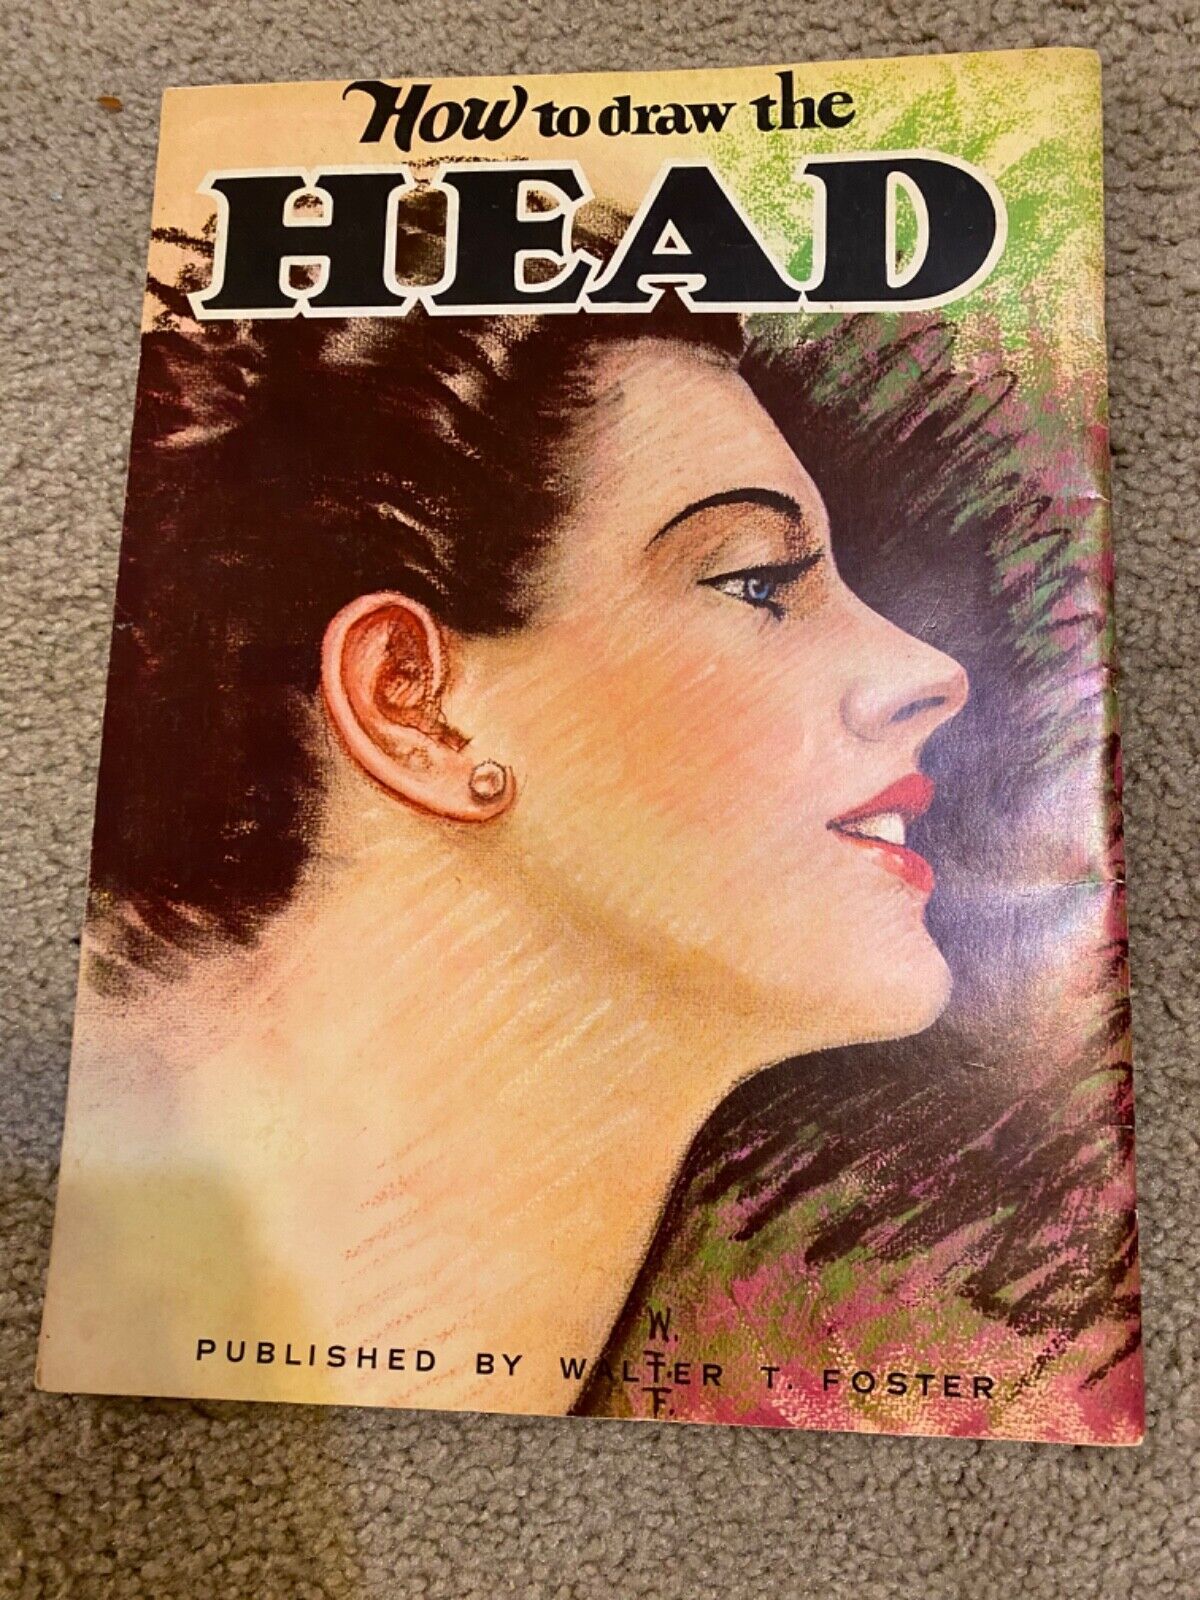 WALTER FOSTER ART BOOK  RARE  OLD  1940'S   -- HOW TO DRAW THE HEAD - $18.69